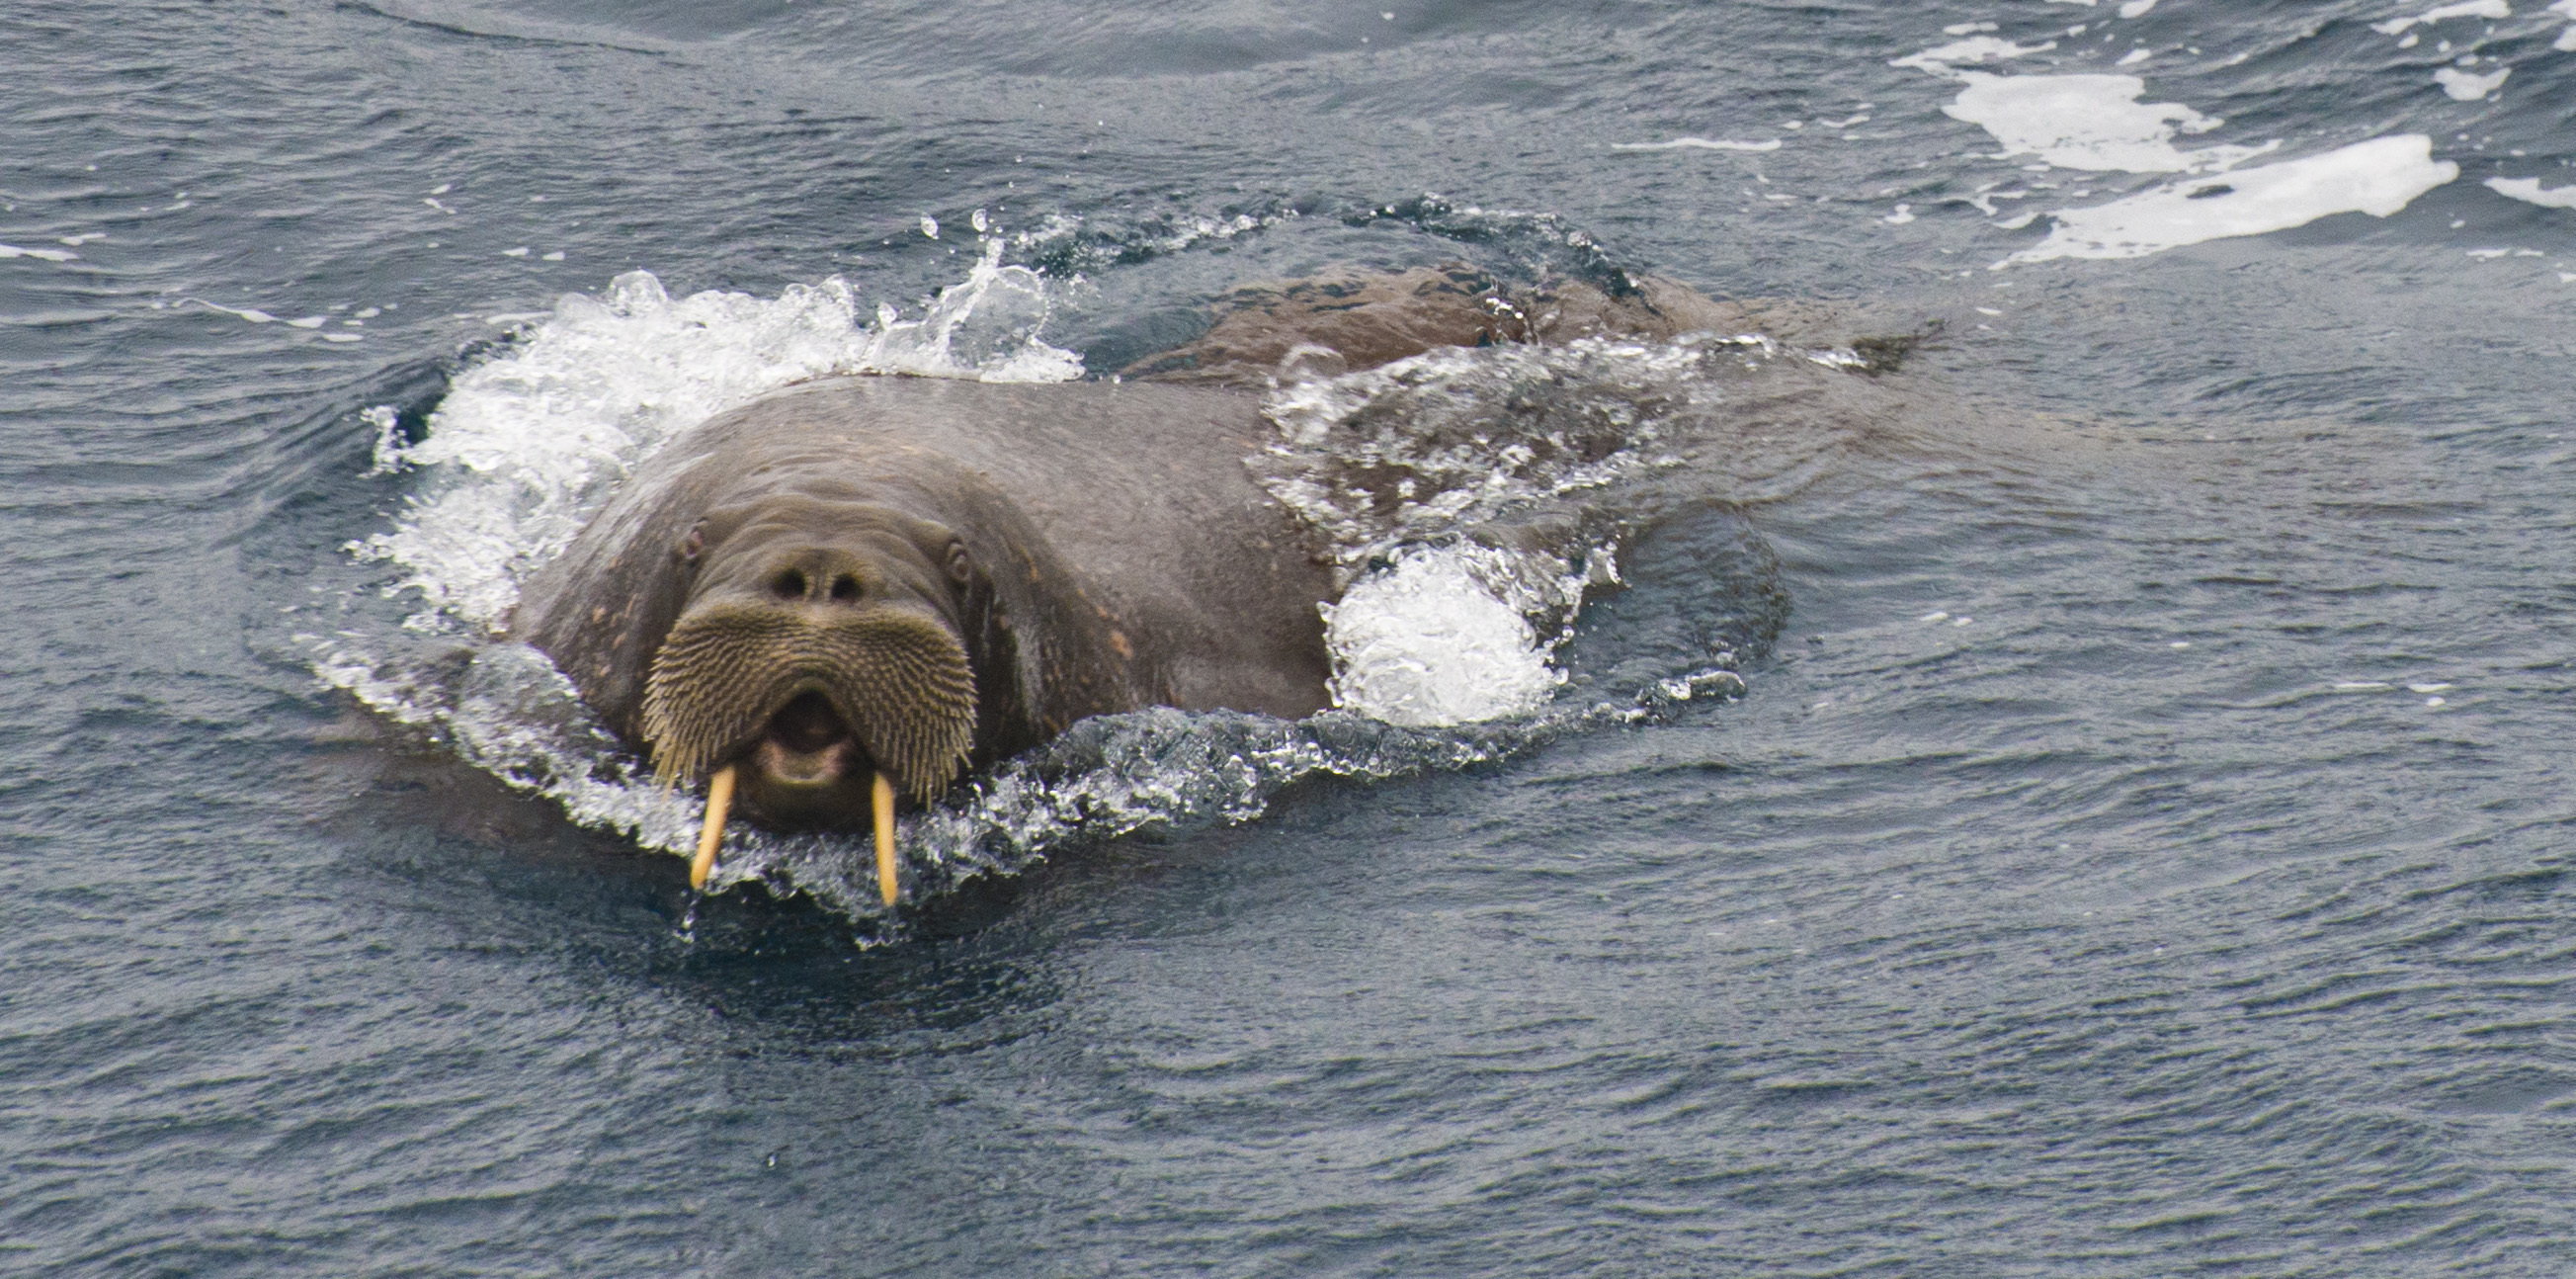 A walrus is seen by the Coast Guard Cutter Maple (WLB 207) crew underway on their historic voyage up through the Northwest Passage in the Beaufort Sea, Alaska, July 22, 2017. Cutter Maple and crew assisted a research scientist with the collection of zooplankton to analyze the abundance of bowhead whale's food source. (Petty Officer 2nd Class Nathan Littlejohn / U.S. Coast Guard)